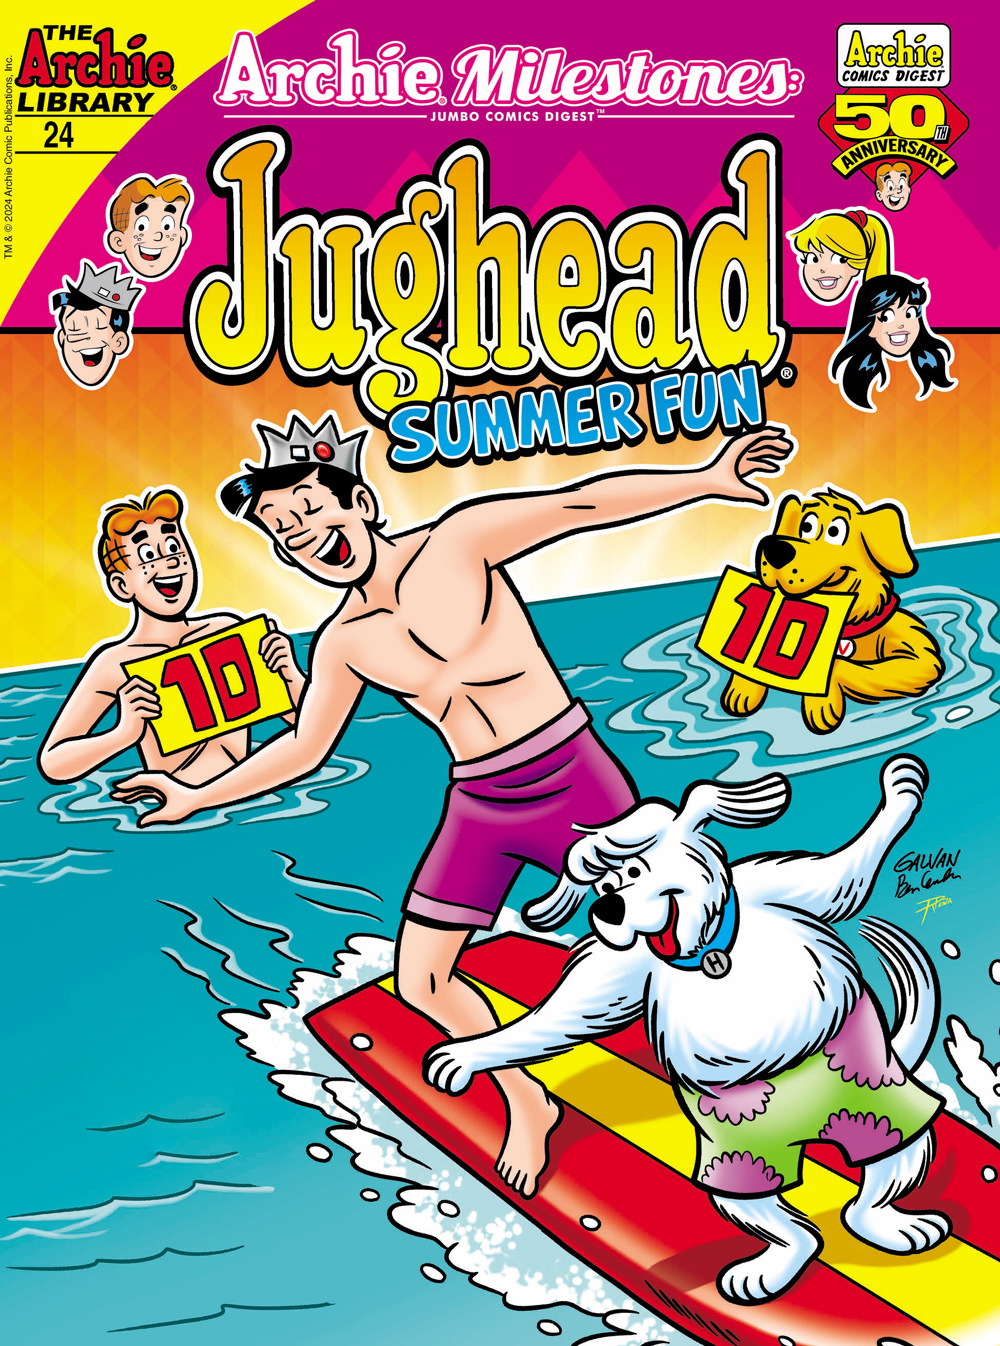 Jughead and his dog Hot Dog share a surfboard, while Archie and Vegas the dog float in the ocean behind them holding up signs with their 10-out-of-10 rating for his moves.